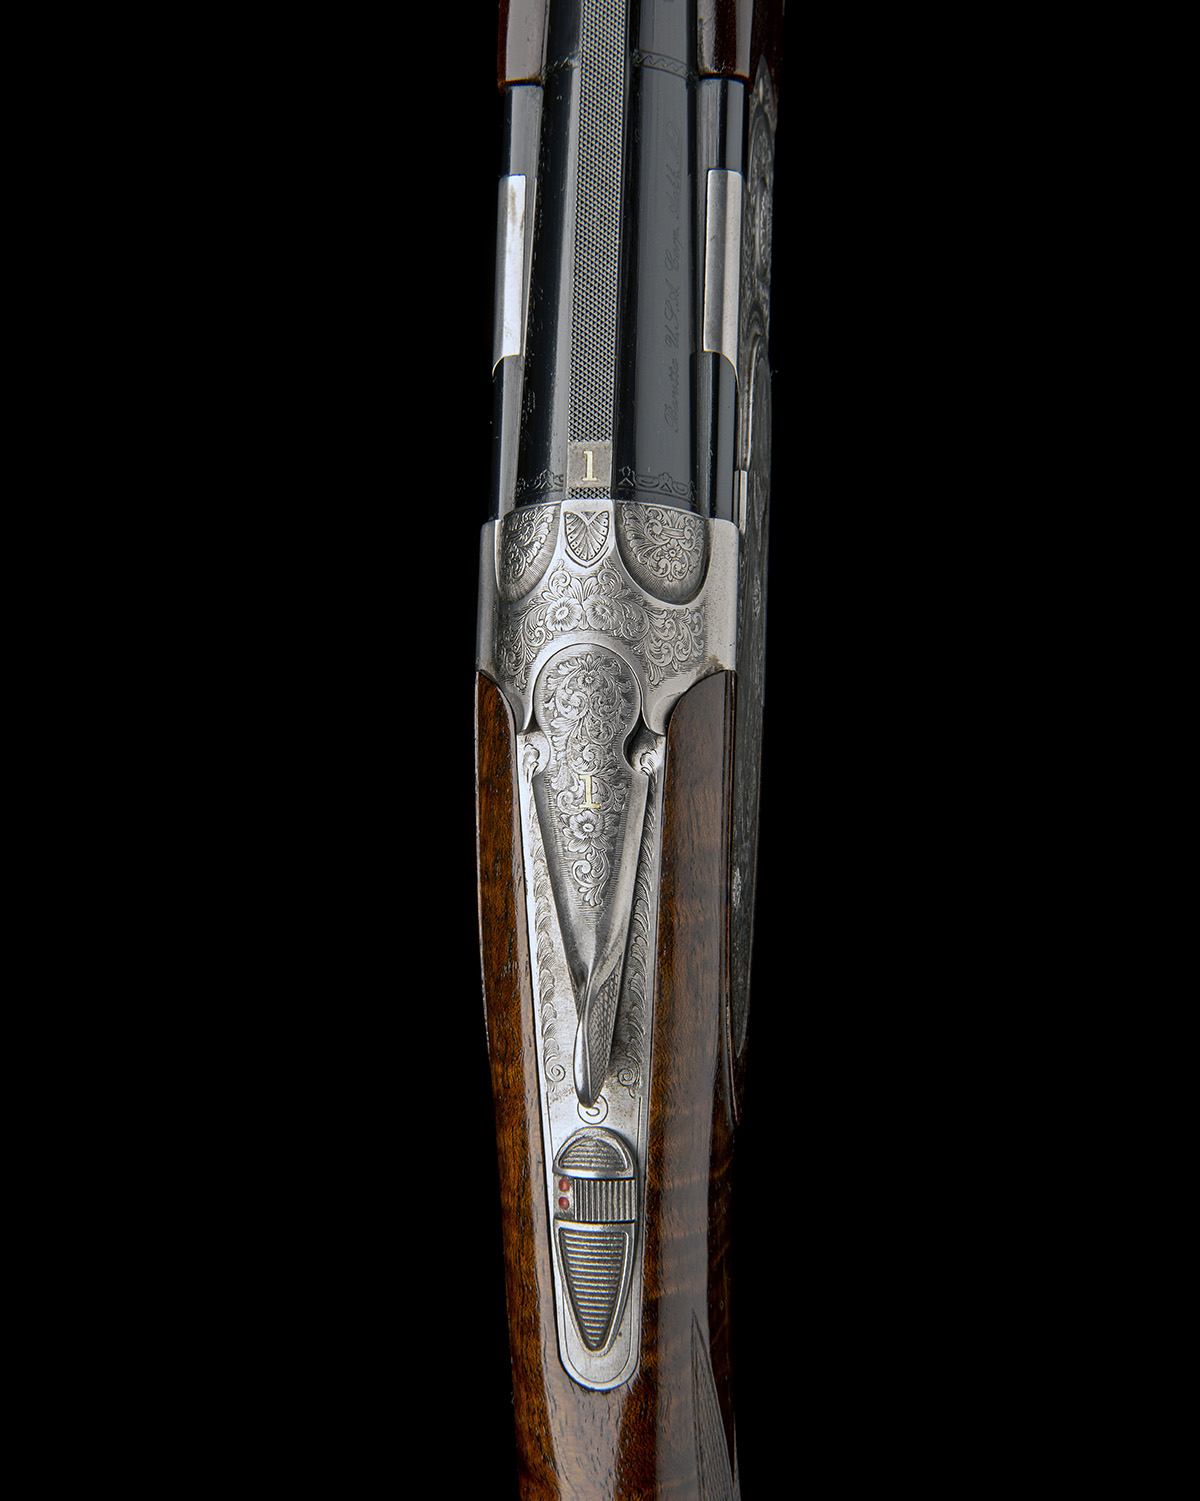 P. BERETTA A 20-BORE (3IN.) 'S687 EELL DIAMOND PIGEON' SIDEPLATED SINGLE-TRIGGER OVER AND UNDER - Image 6 of 7